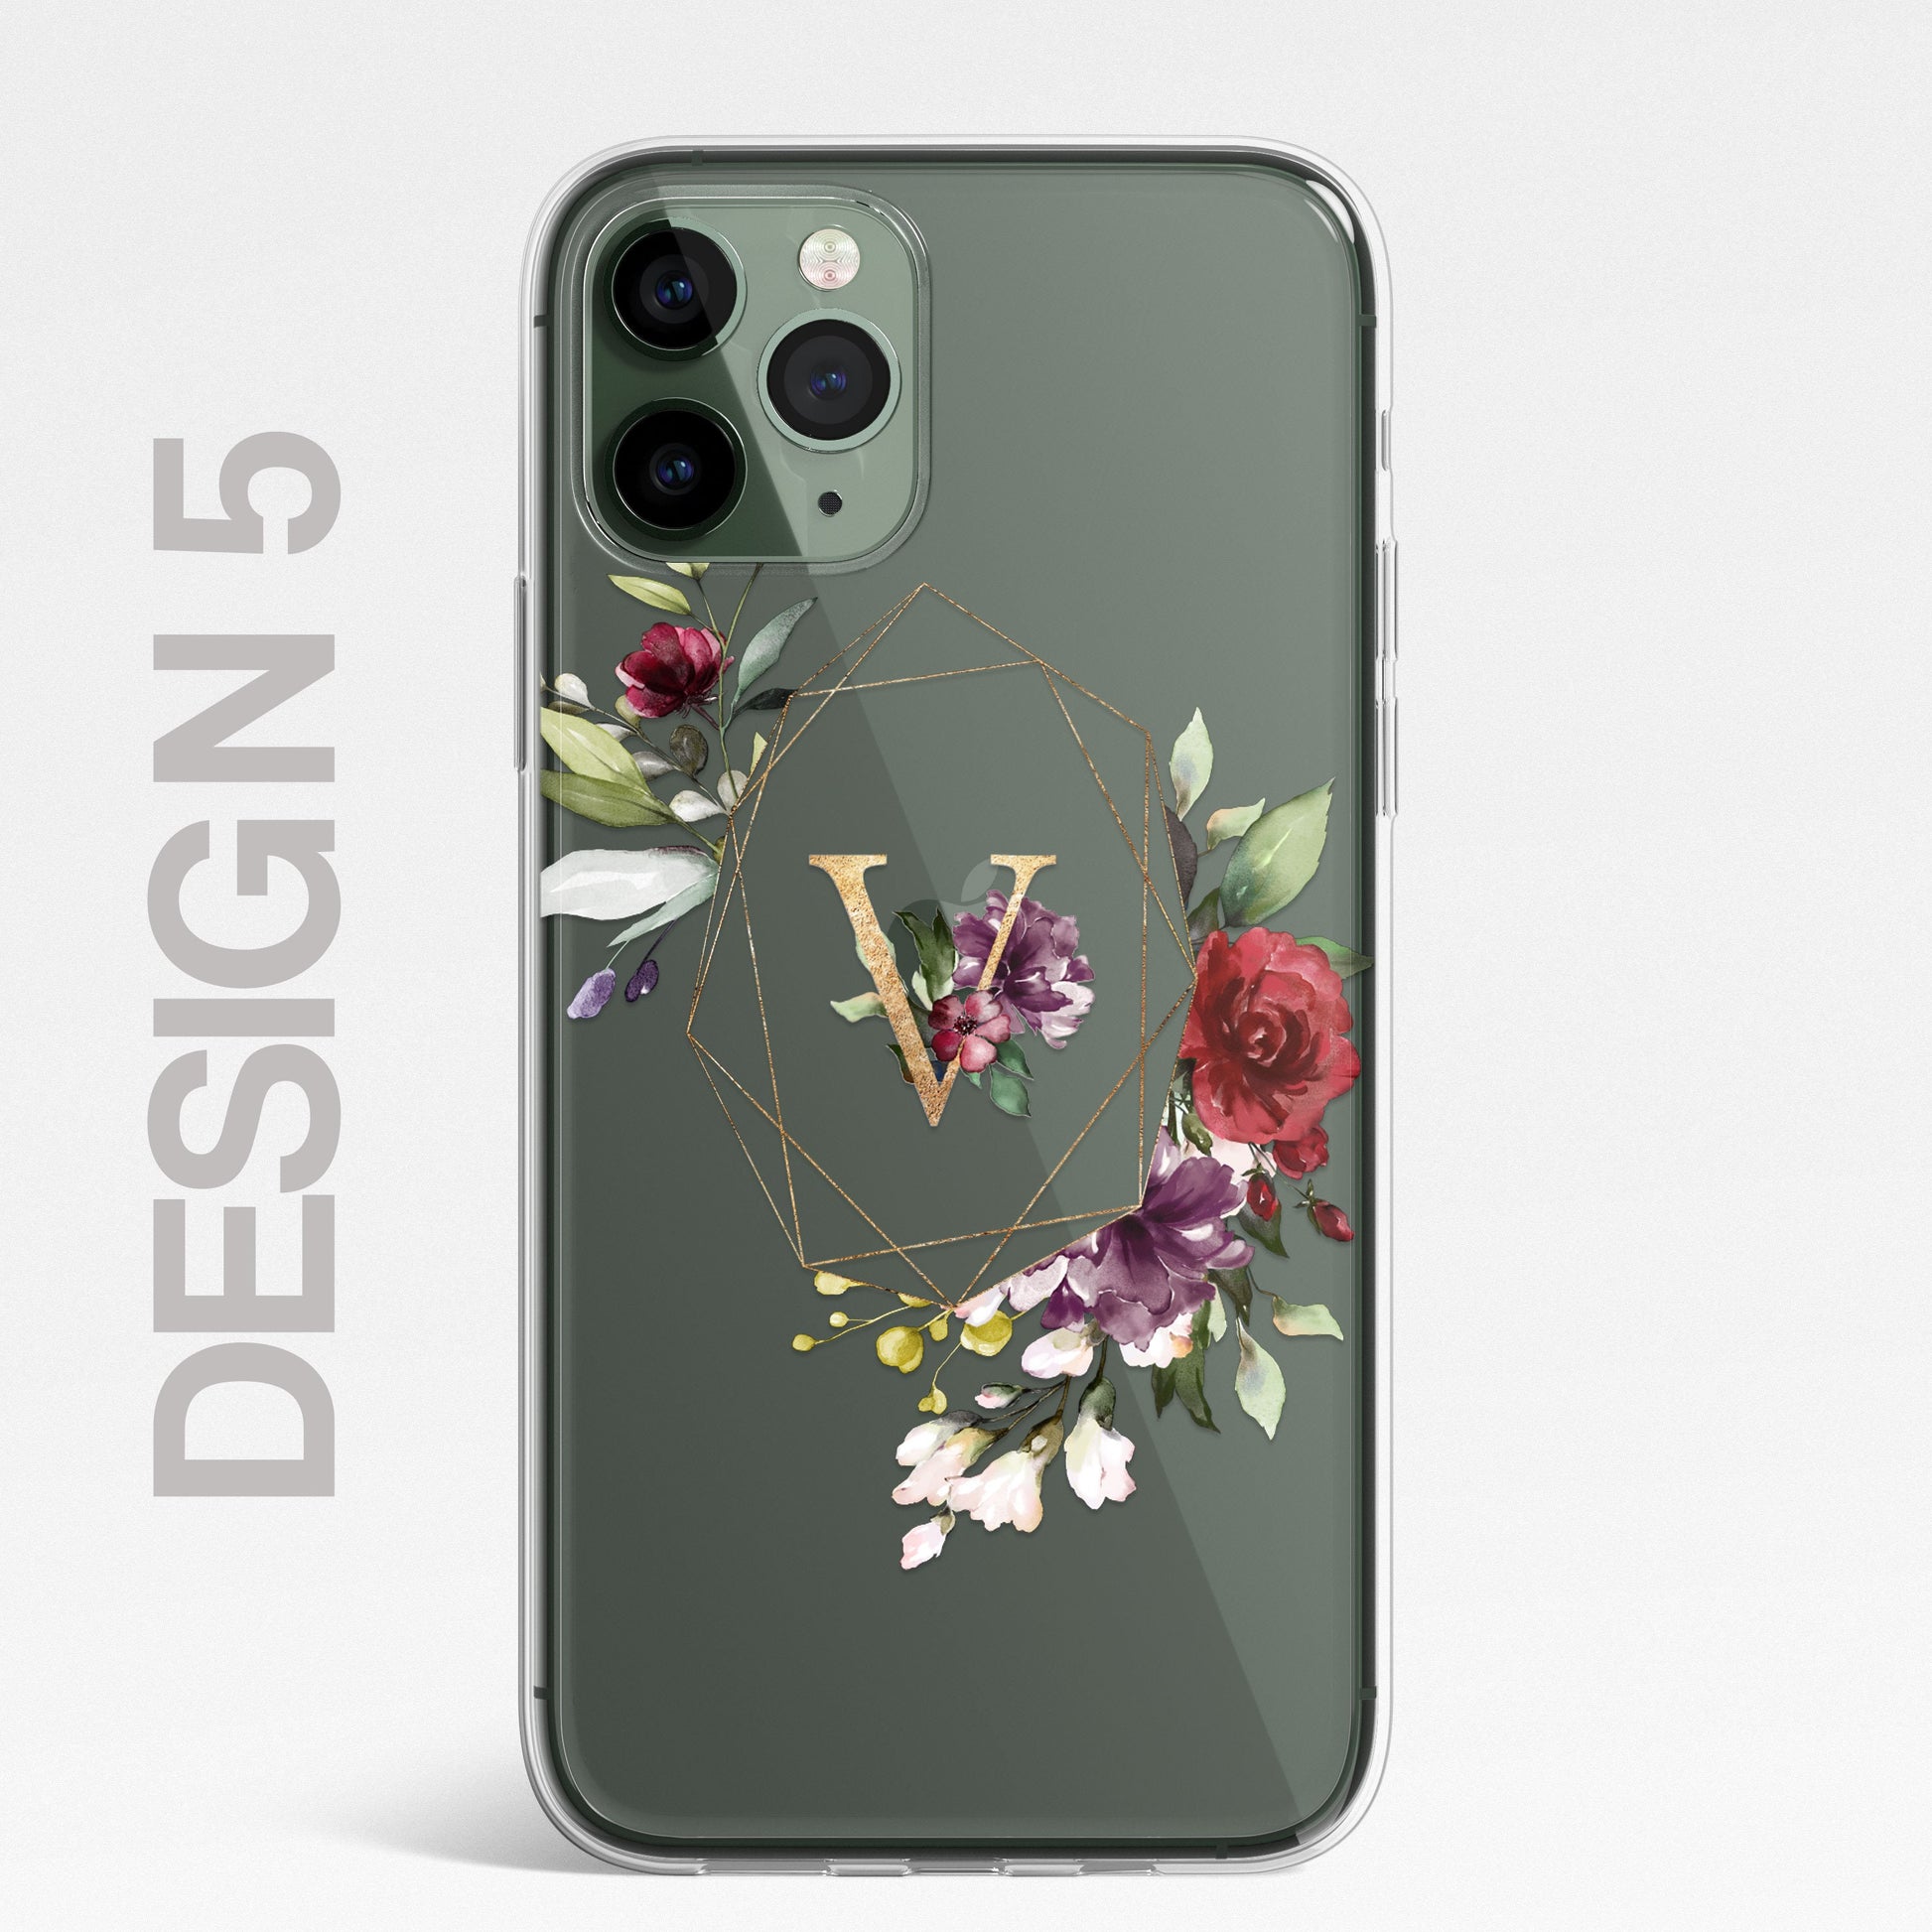 Floral Custom Phone Case Cover in CLEAR Silicone with Personalised Initials Name RED Floral Flower Design for iPhone & Samsung Galaxy